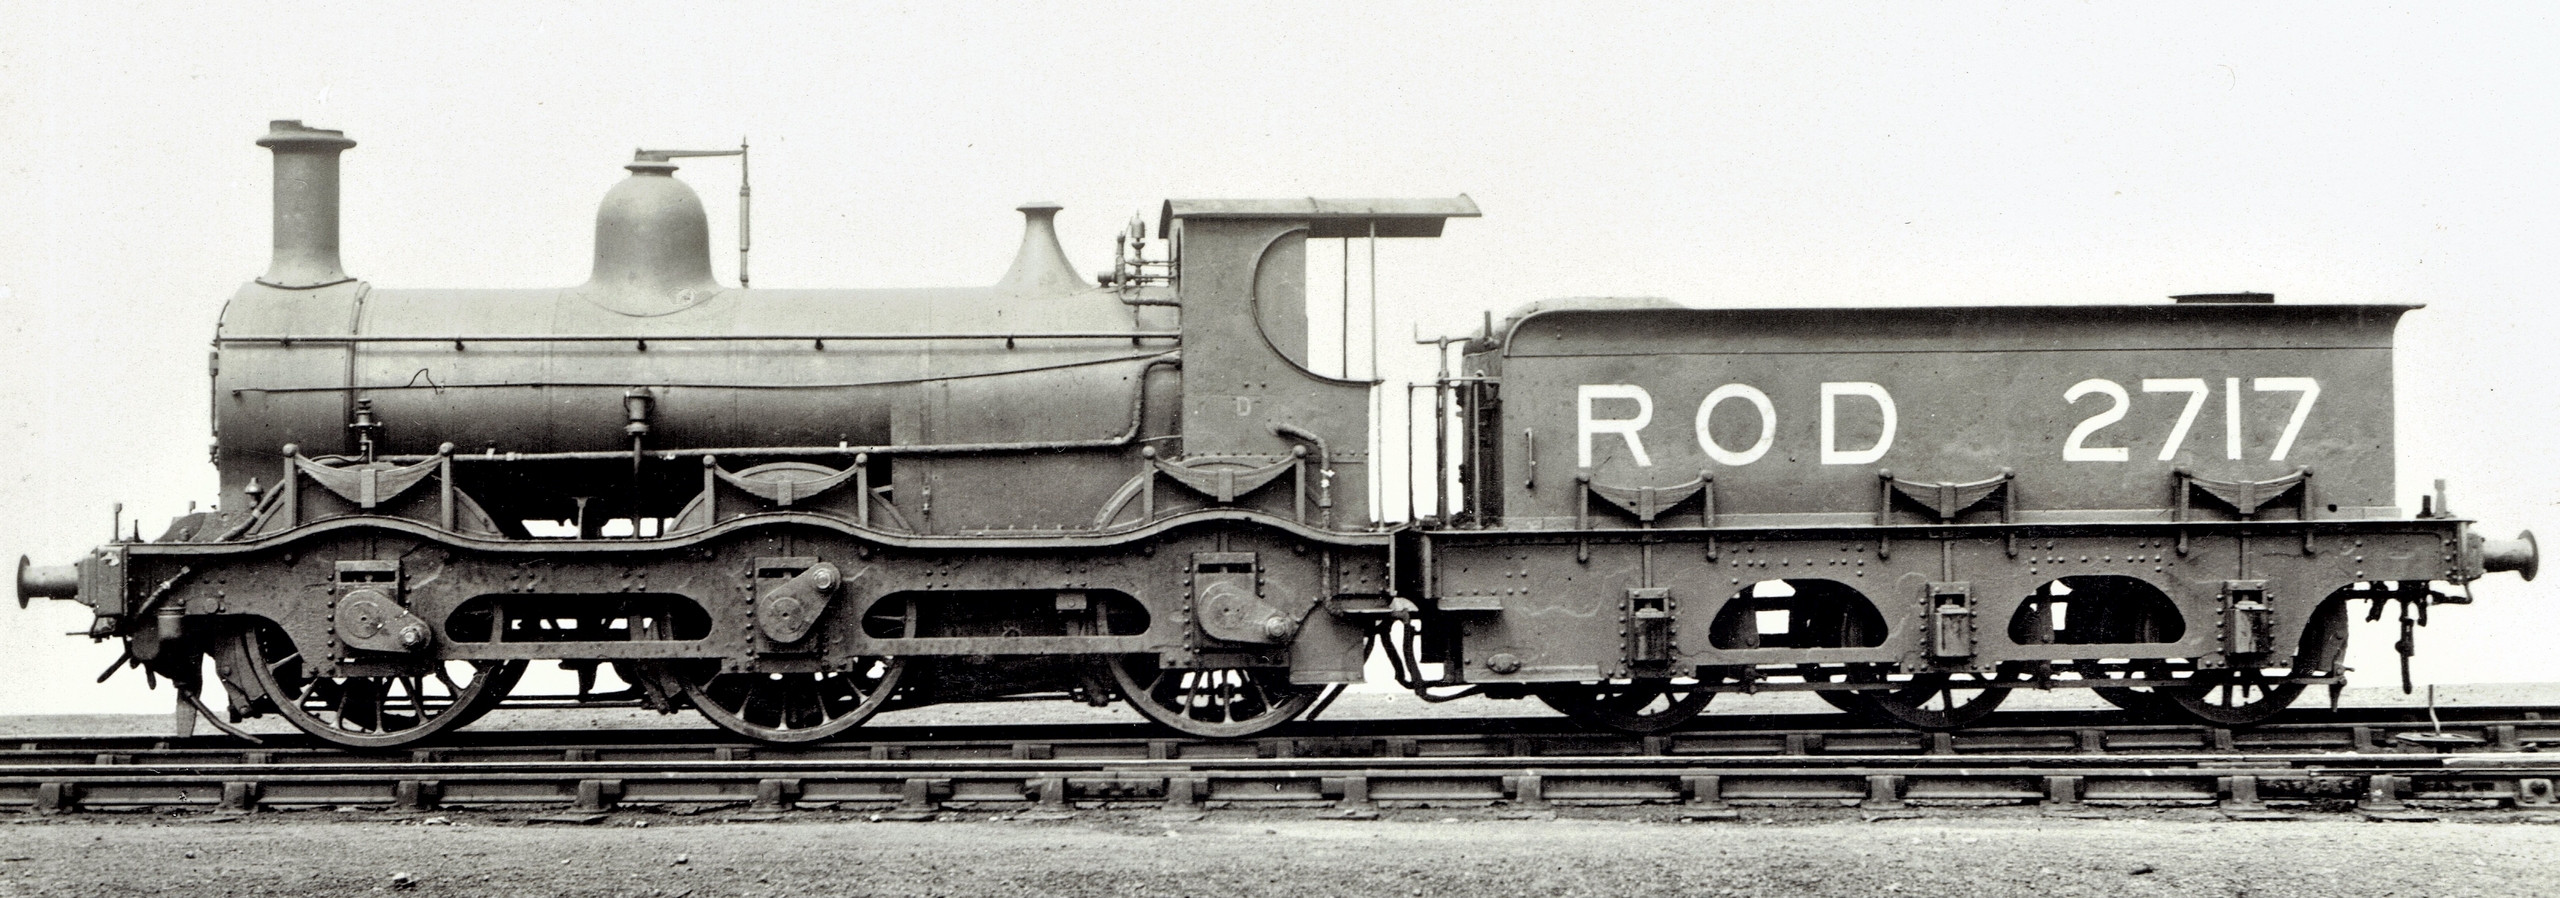 ROD 2717, which fell into German hands in World War I and was recovered later